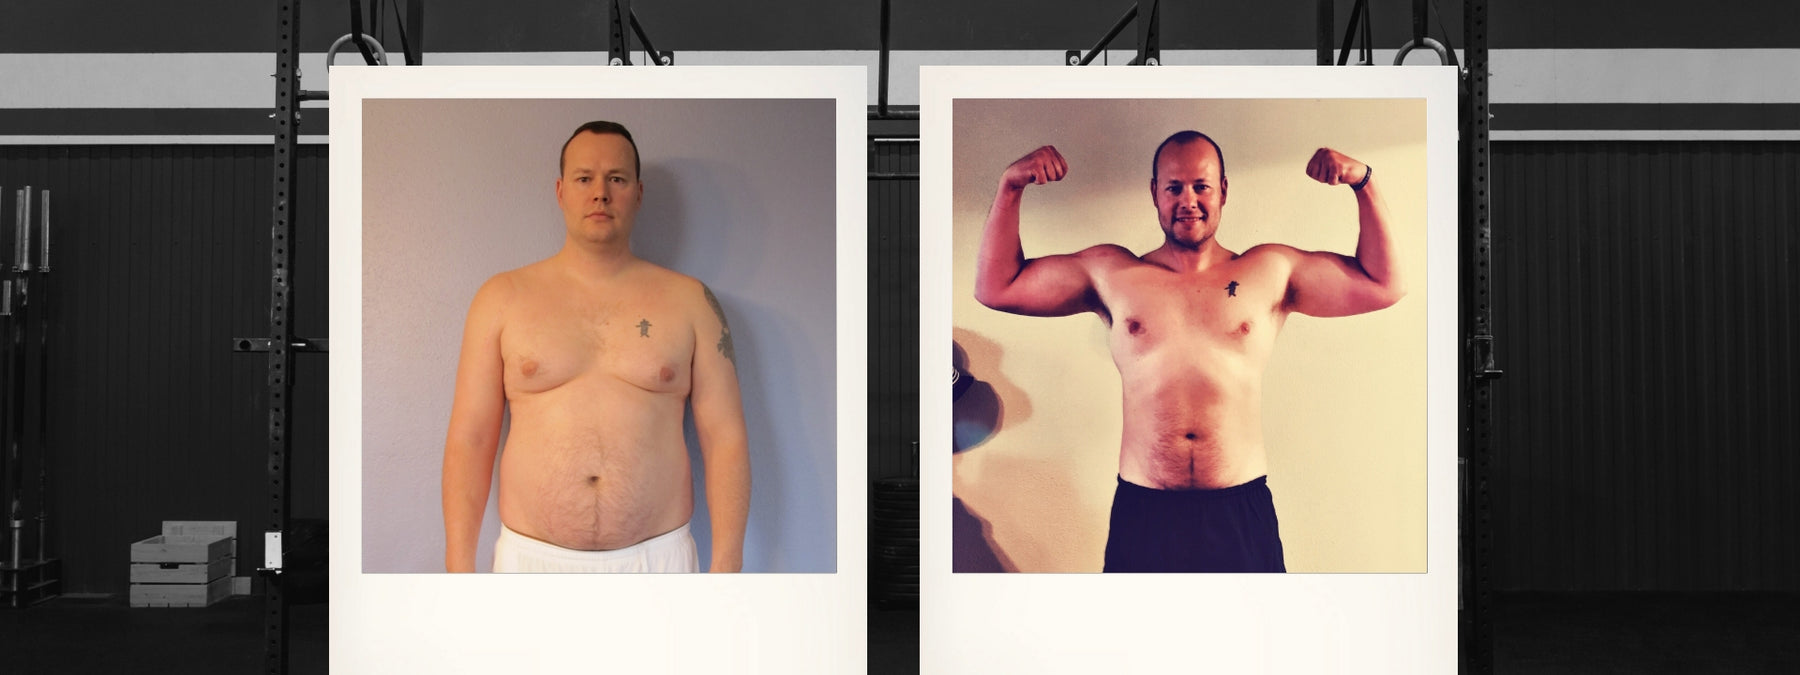 Army Vet Cory Sanden Was Shocked to Hit 300 Pounds